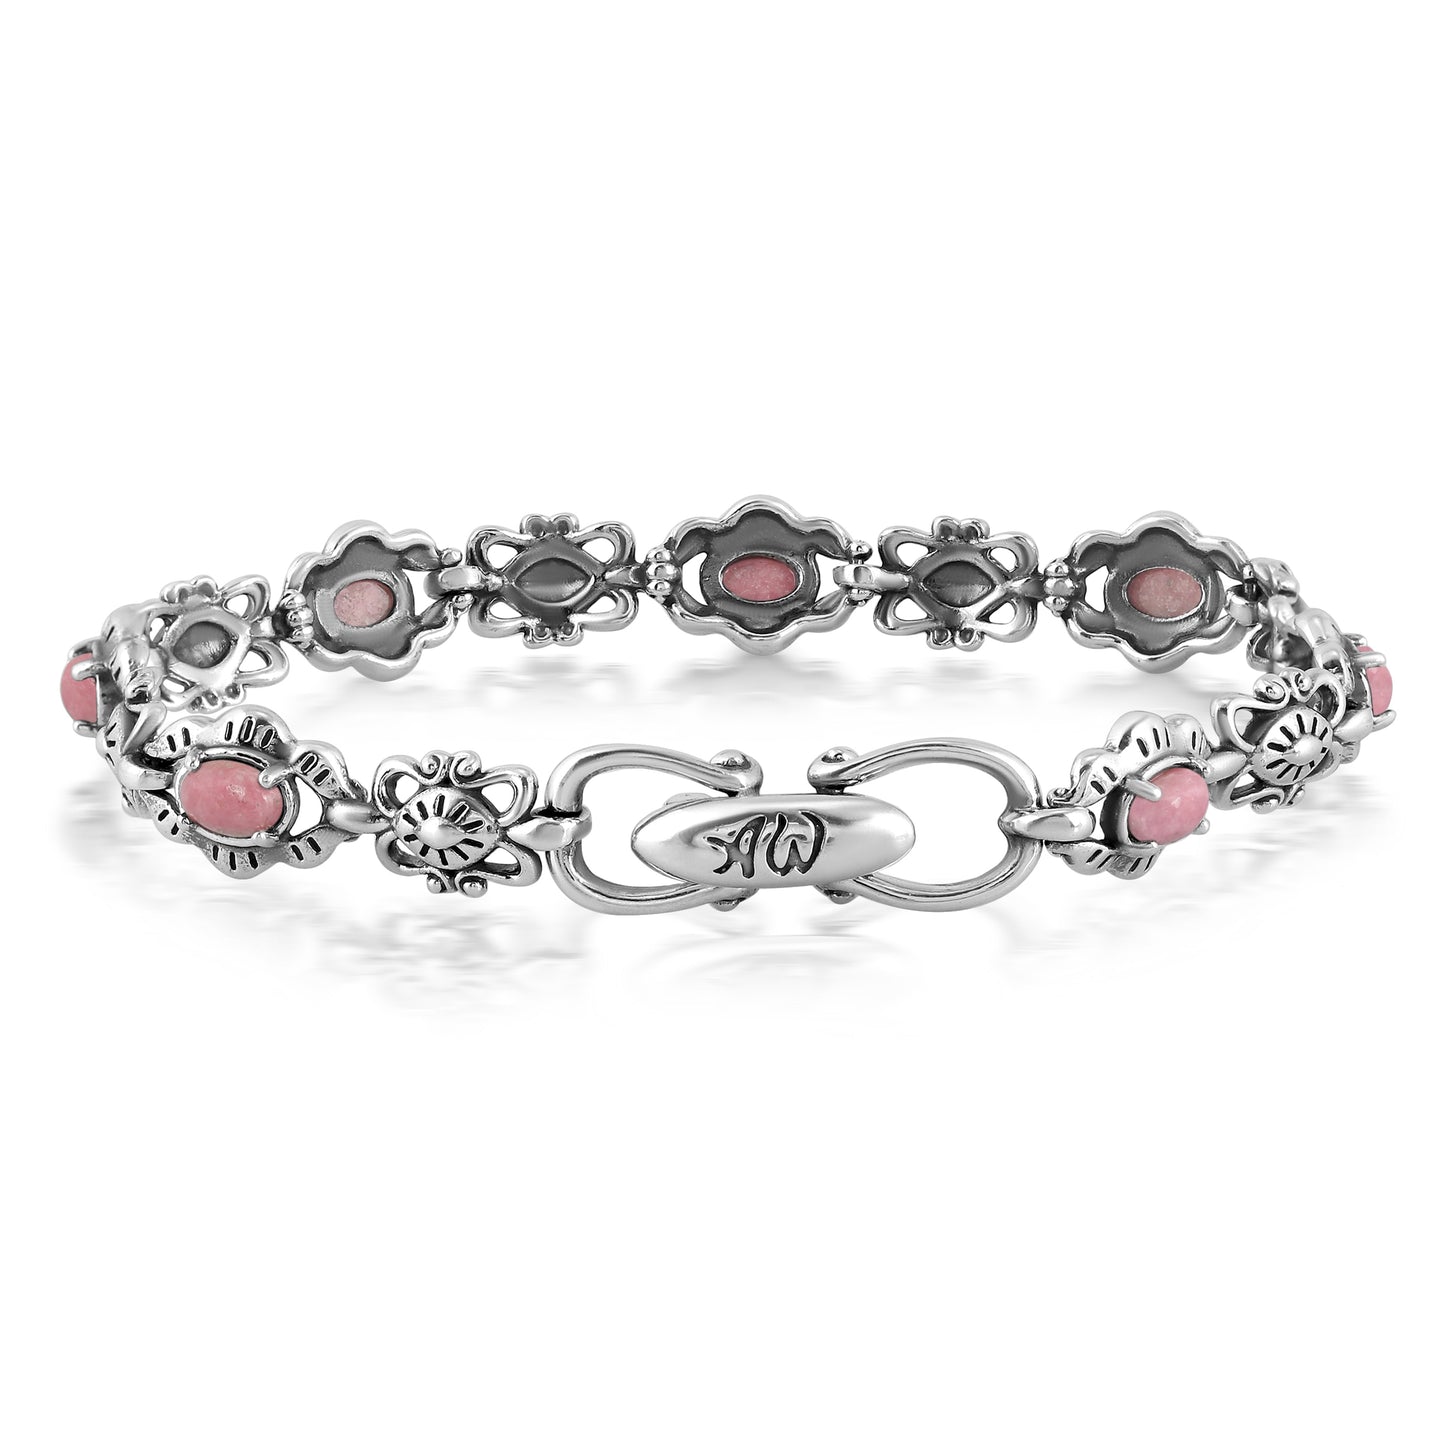 Southwestern Sterling Silver with Rhodonite Gemstone Concha Link Bracelet, Sizes Small - Large